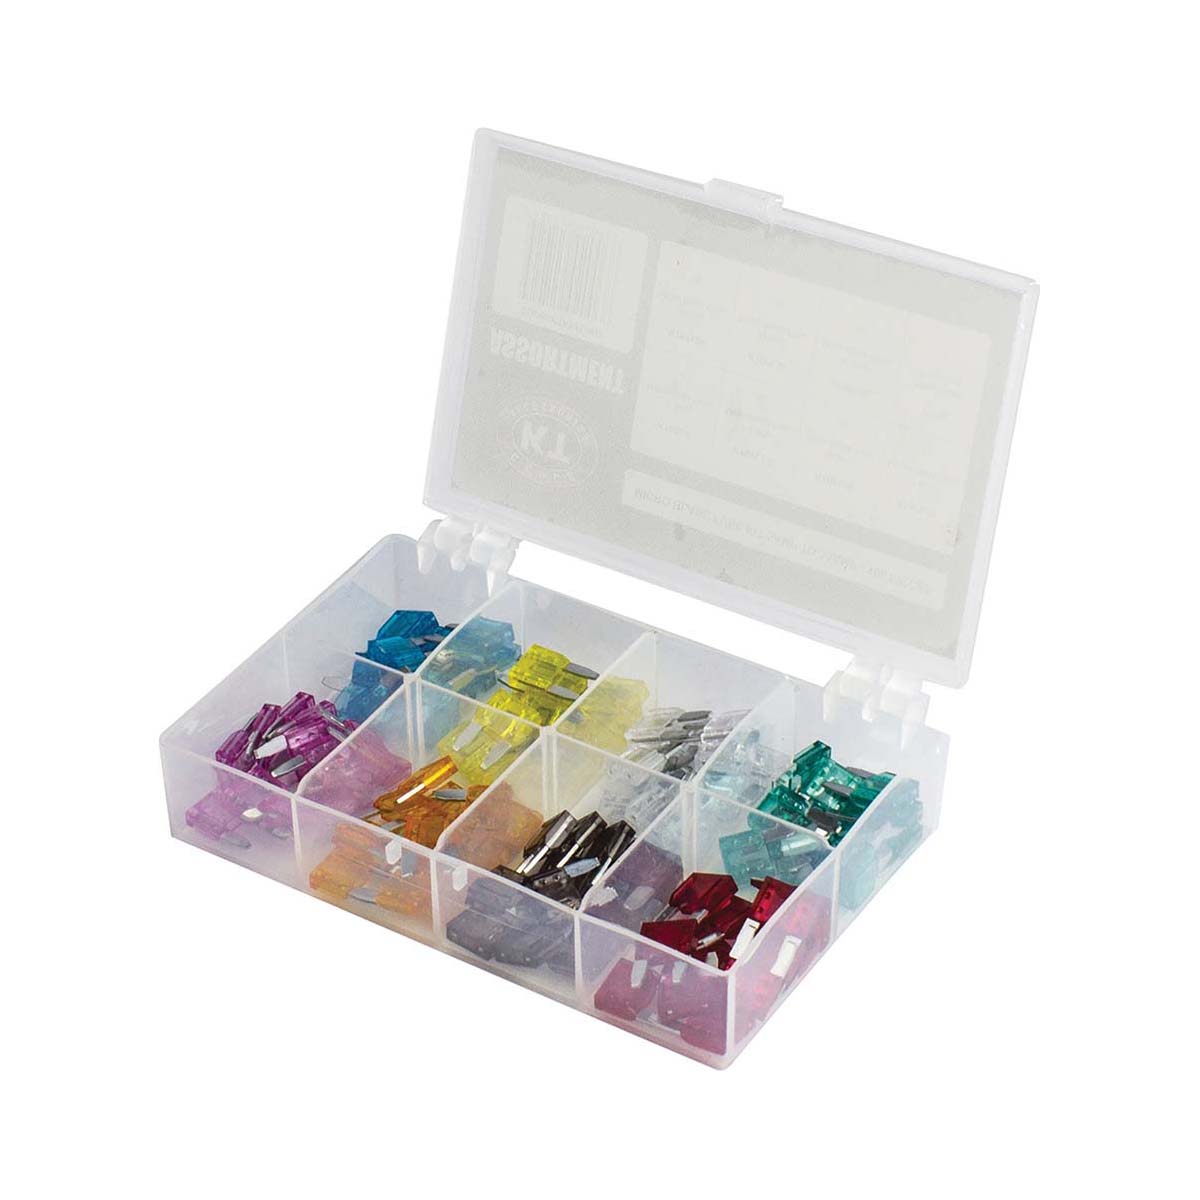 KT Cables Mini Blade Fuse Kit, Assorted, 96 Pieces